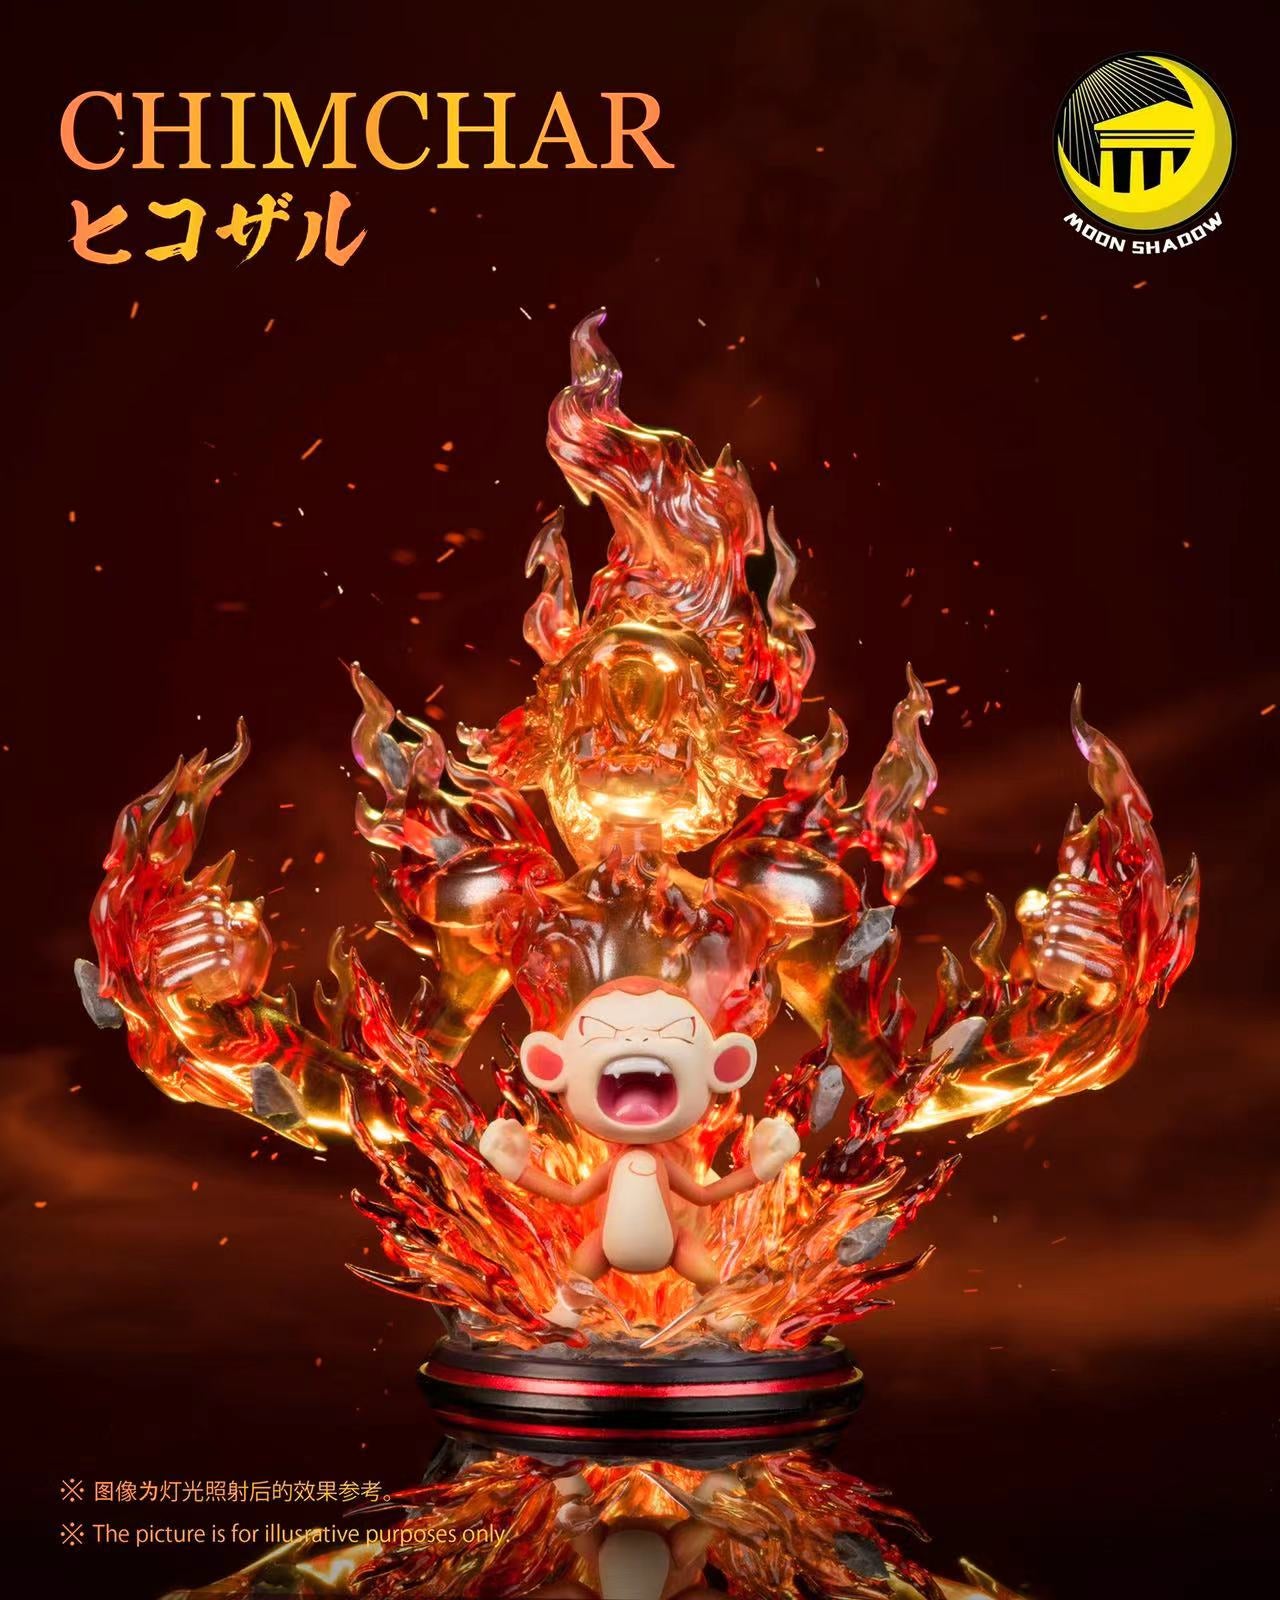 〖Sold Out〗Pokemon Chimchar Model Statue Resin  - Moon shadow Studio